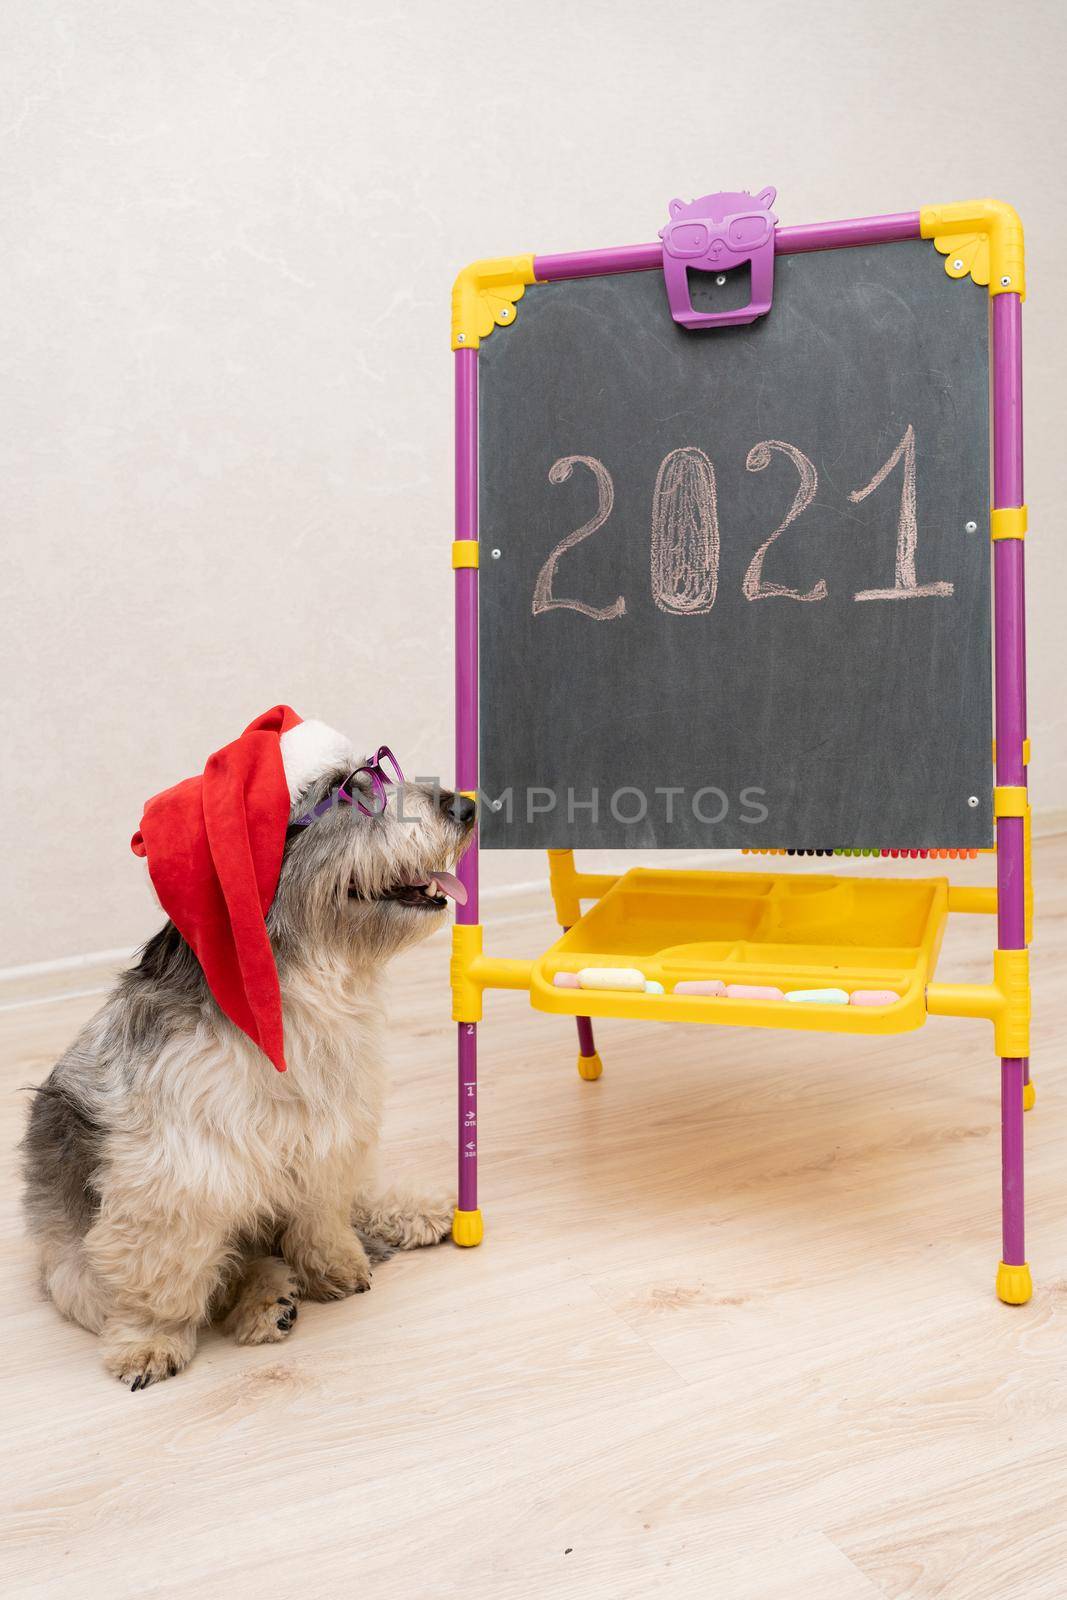 a dog in a new year's Christmas hat sits in front of a blackboard with the year 2021 written on it by olex